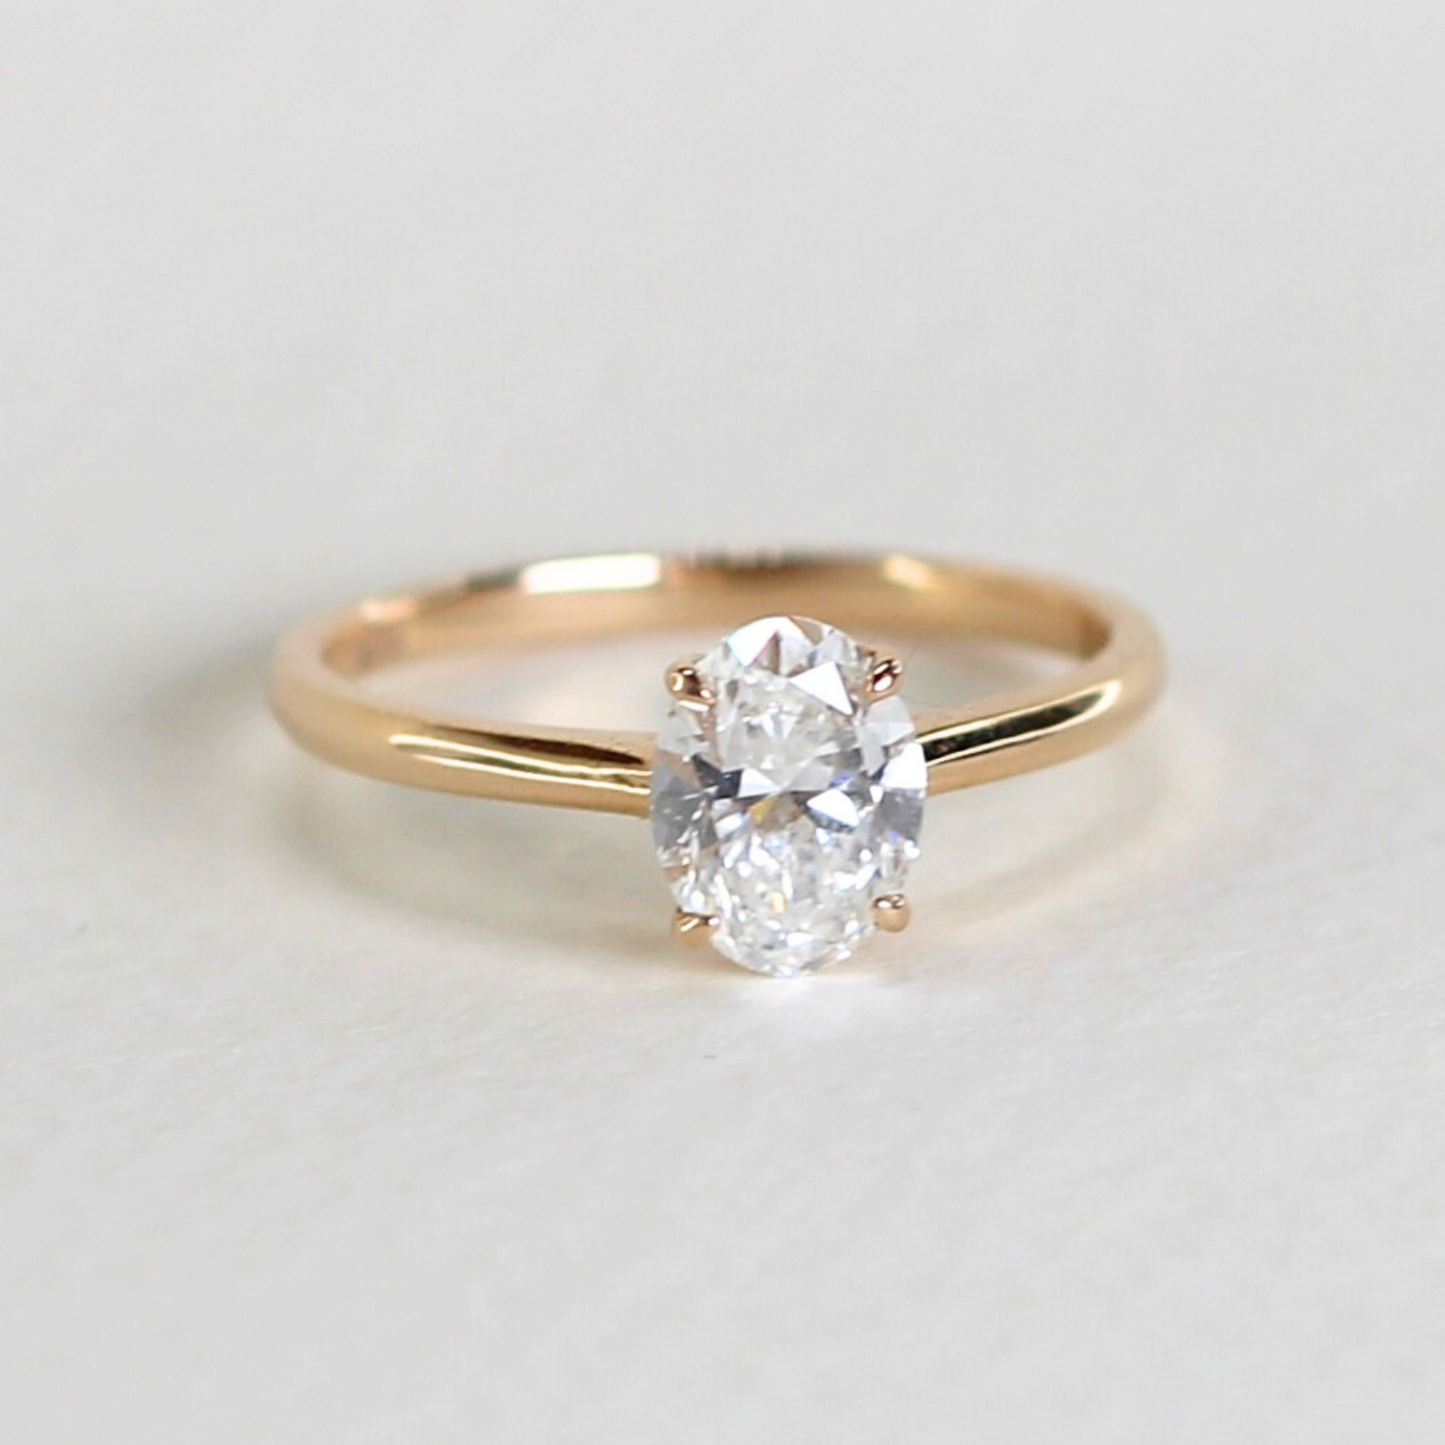 1ct Oval cut Solitaire Diamond ring